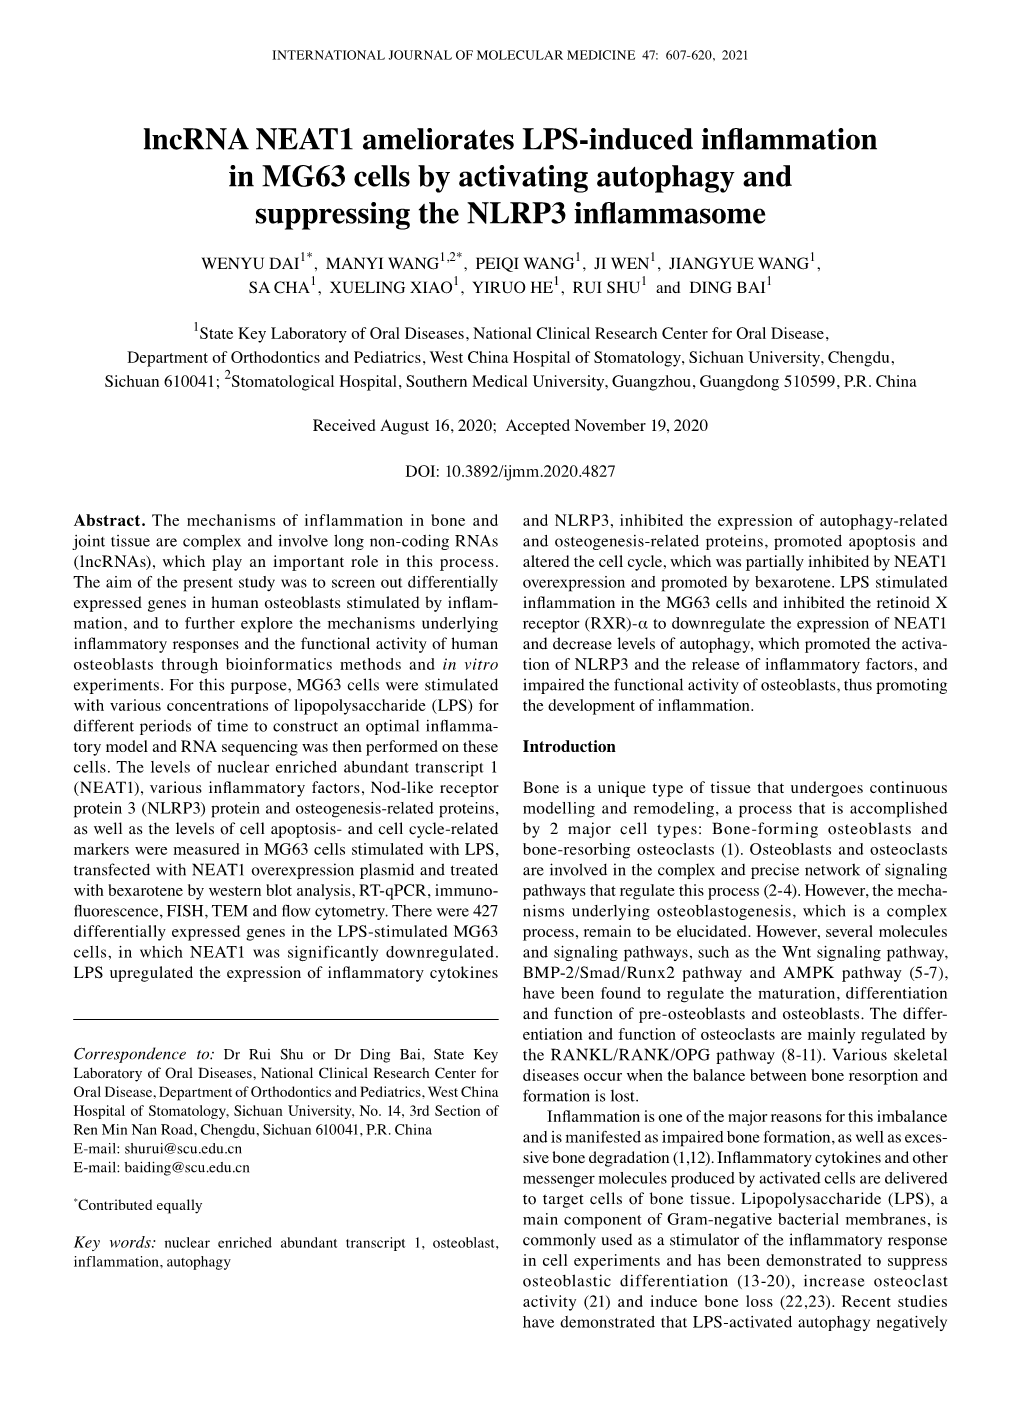 Lncrna NEAT1 Ameliorates LPS‑Induced Inflammation in MG63 Cells by Activating Autophagy and Suppressing the NLRP3 Inflammasome